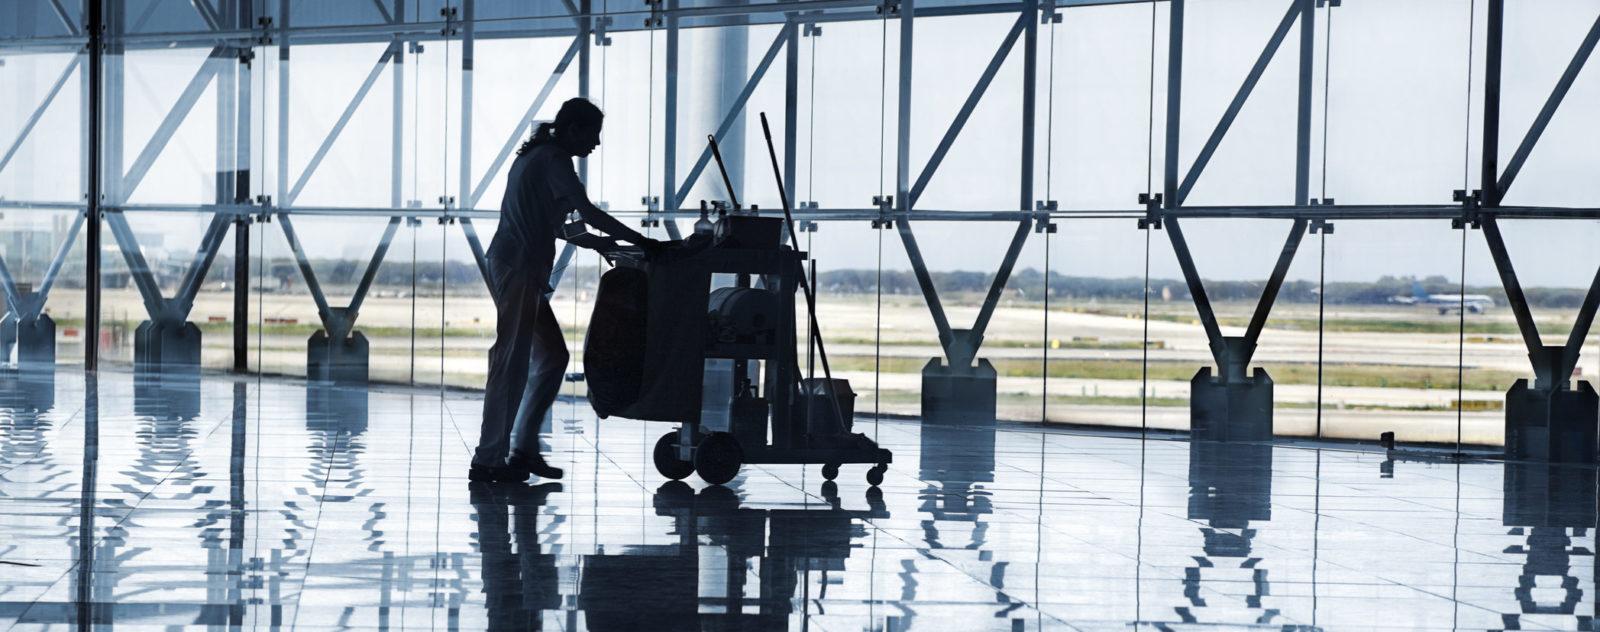 Cleaning person in airport terminal